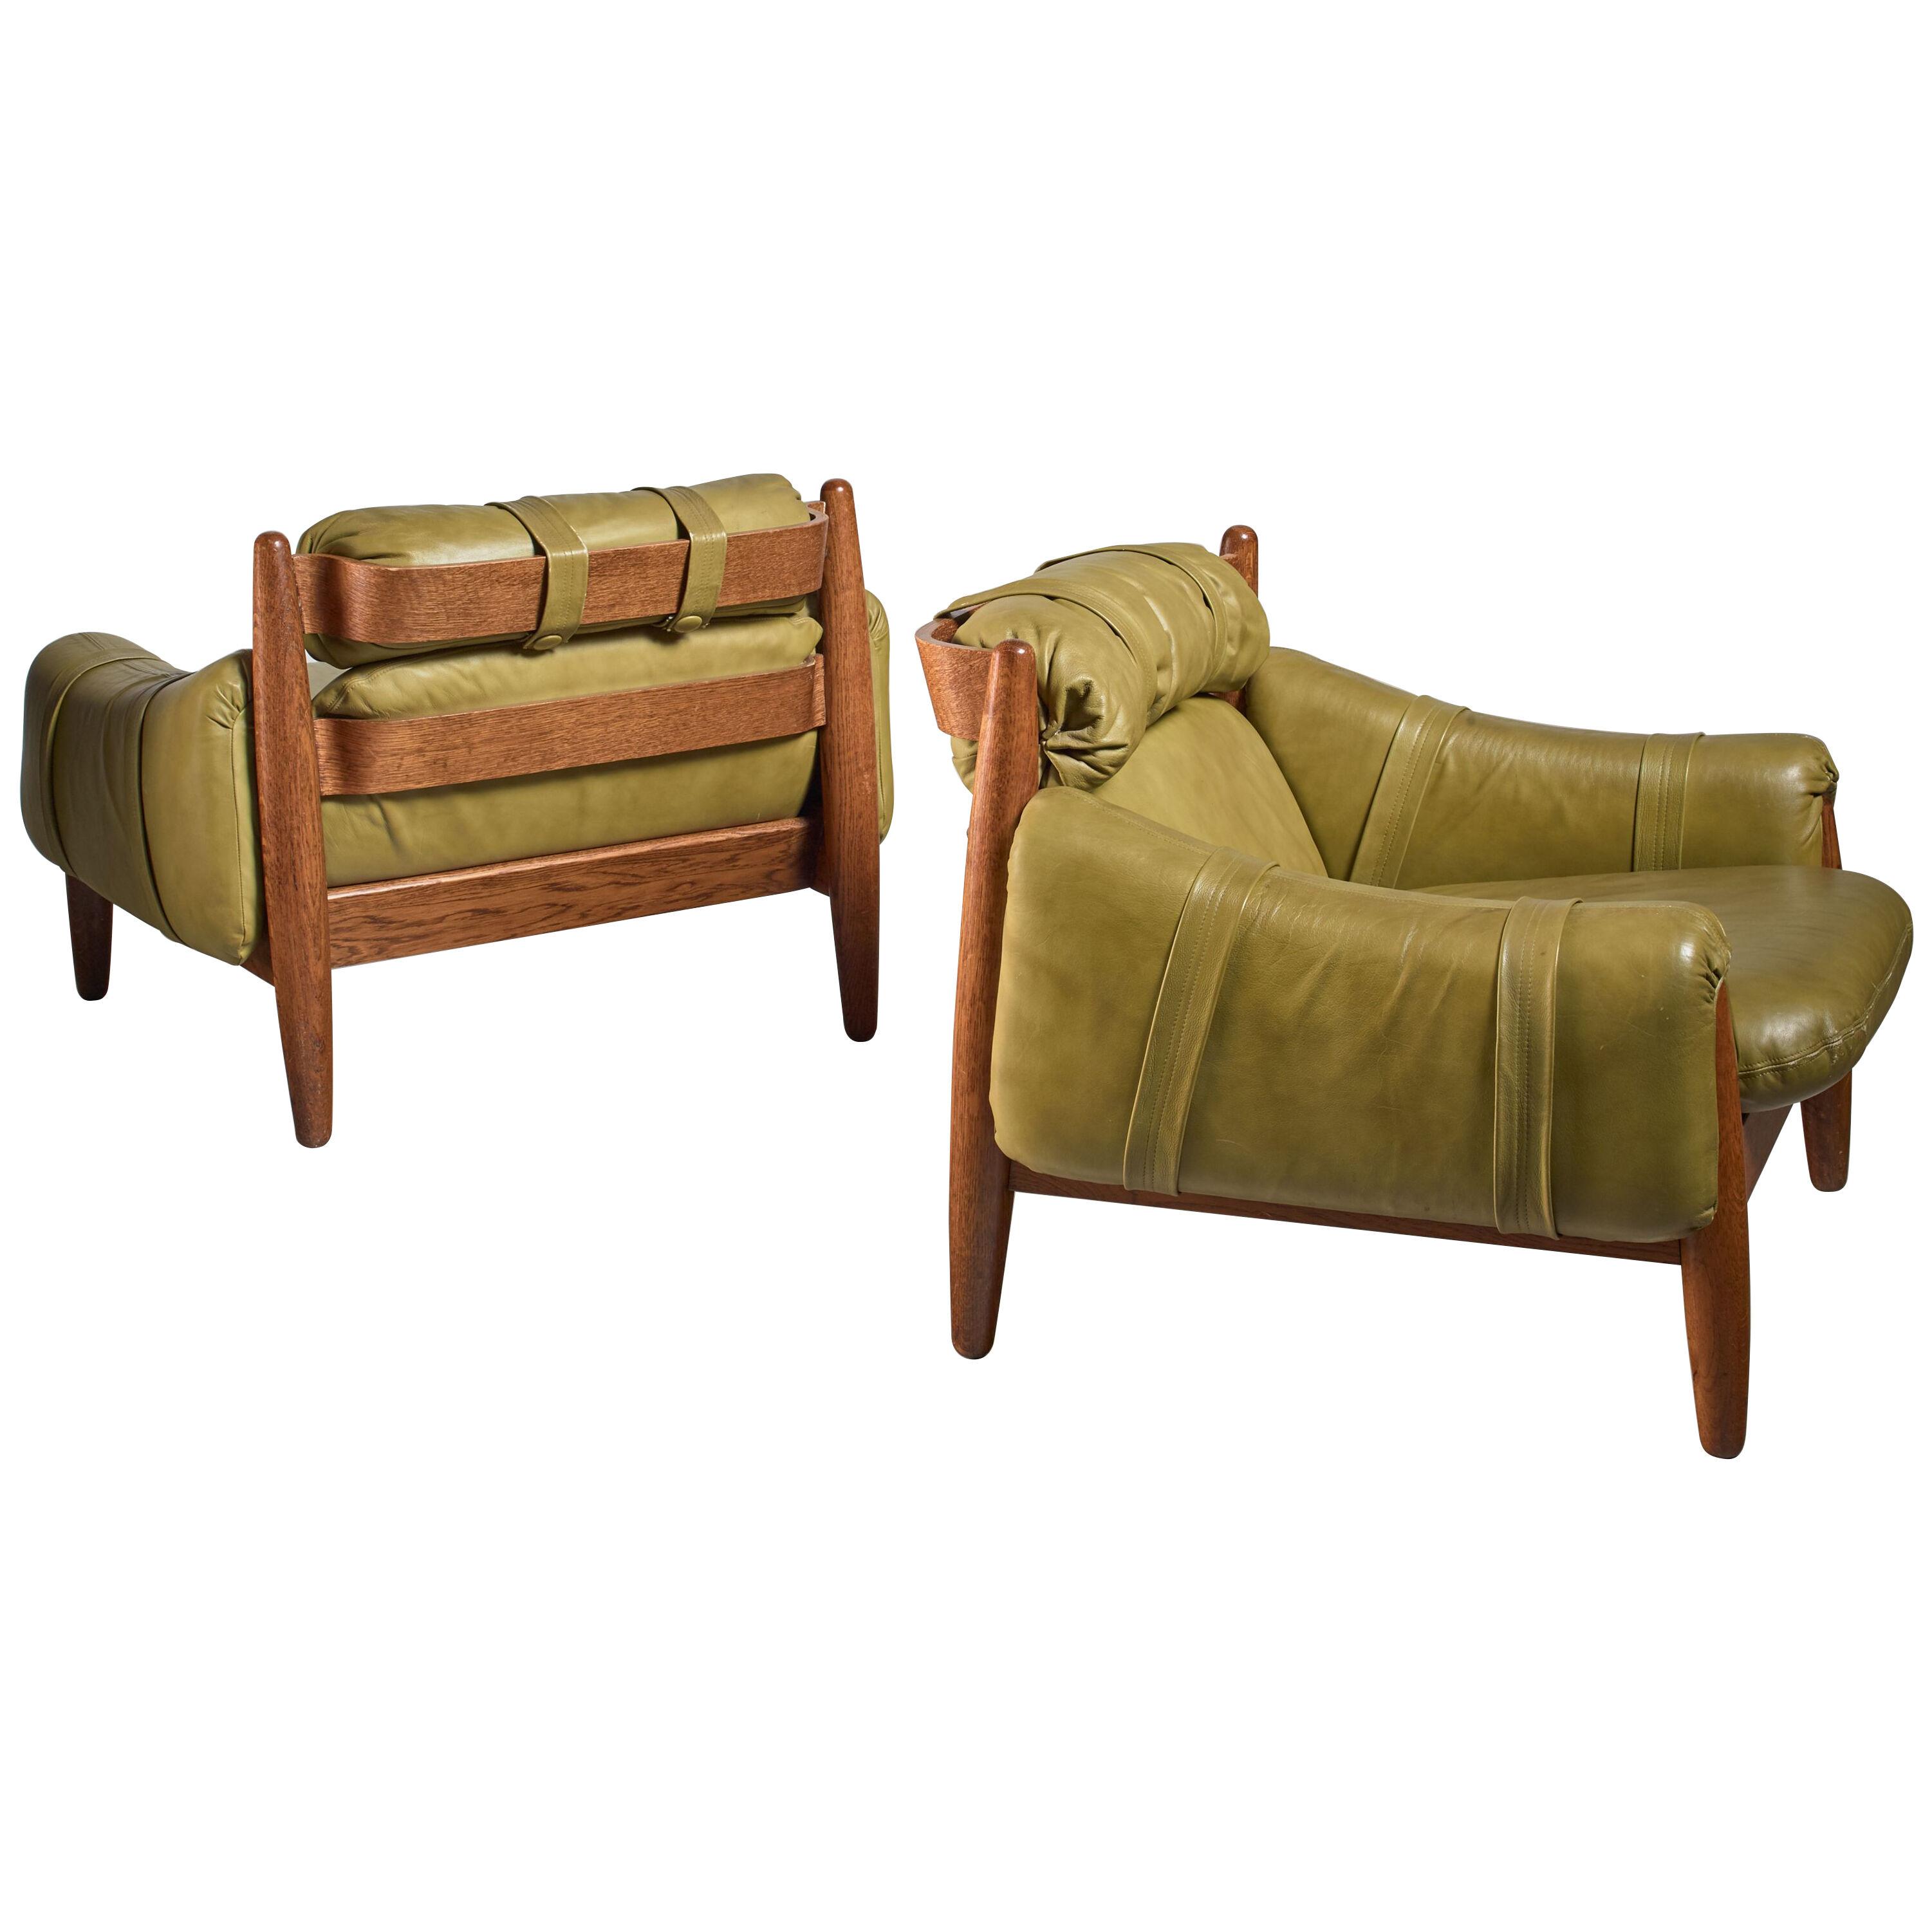 Pair of Oak Lounge Chairs with Green Leather Cushions, Brazil, 1960s